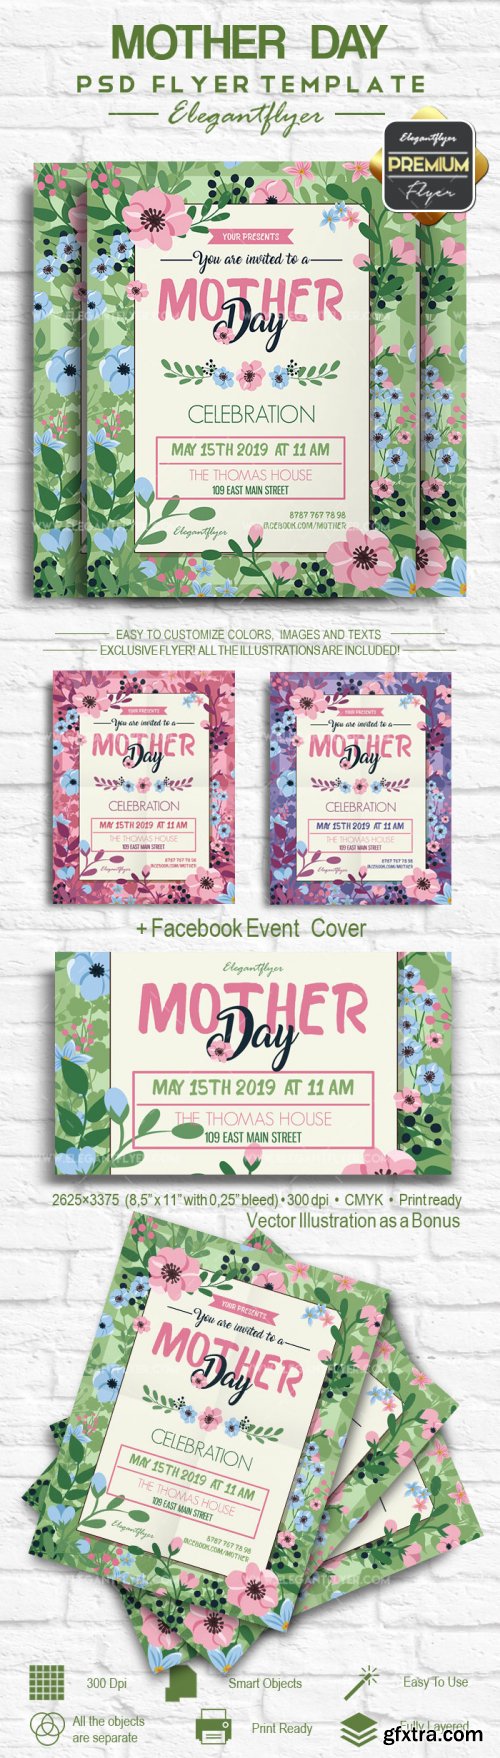 Mother Day V6 2018 Flyer PSD Template